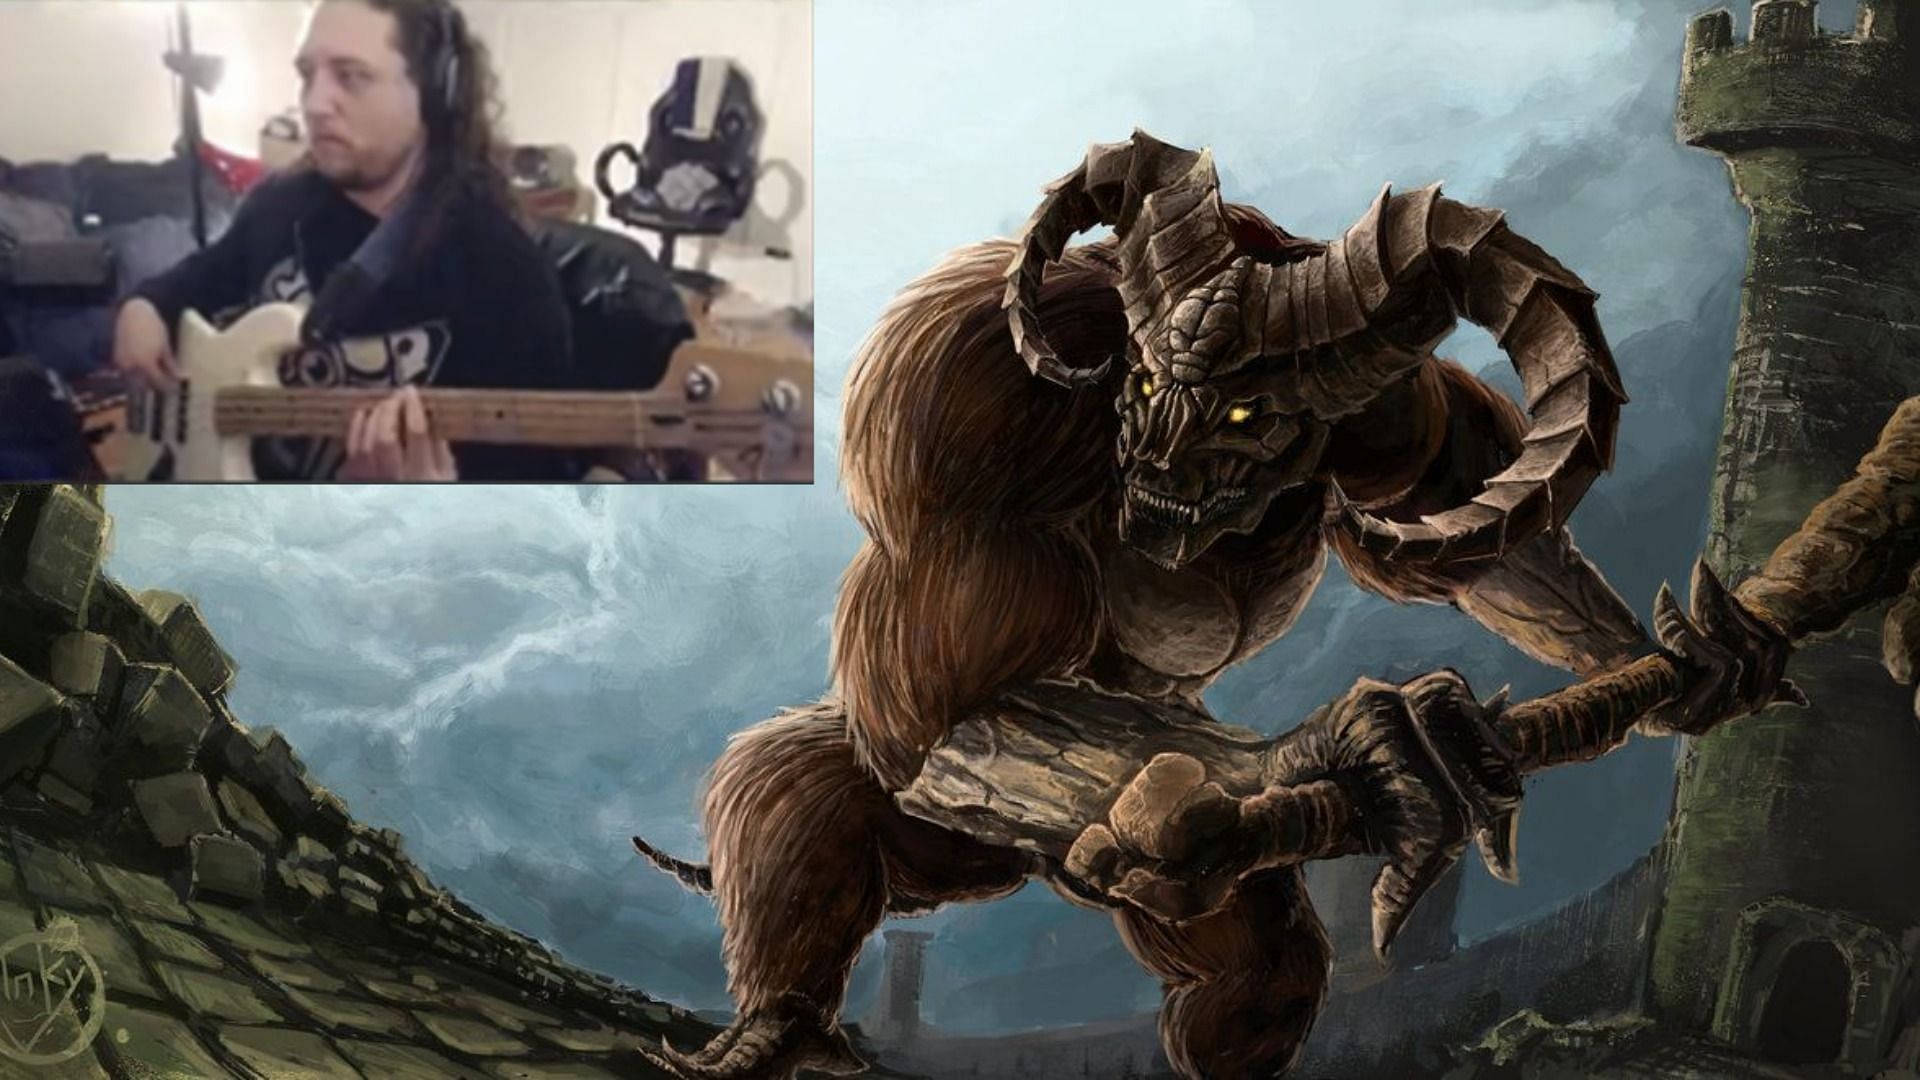 Sonicite playes Dark Souls using an electric bass as controller (Image via Twitch and Pintrest)